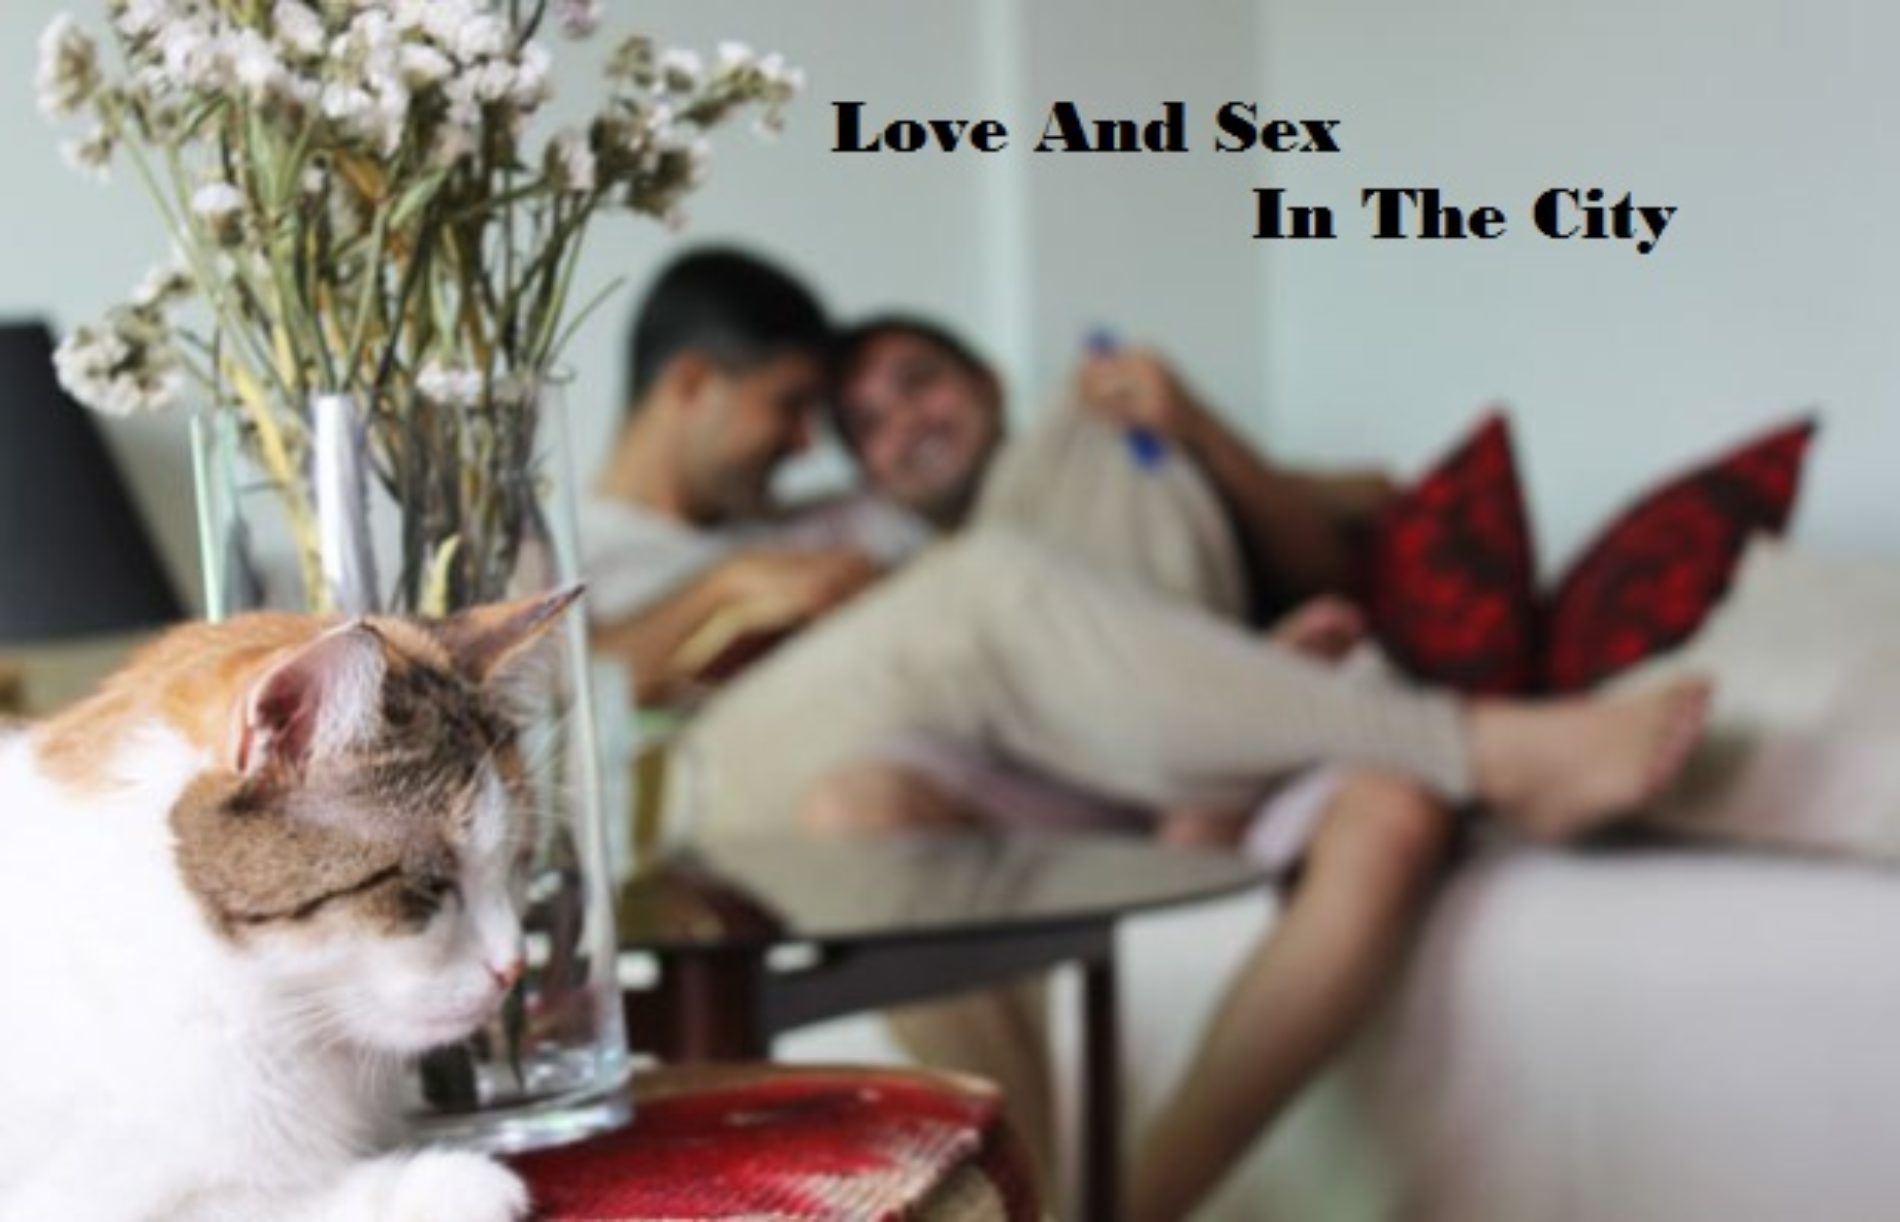 LOVE AND SEX IN THE CITY (Episode 32)